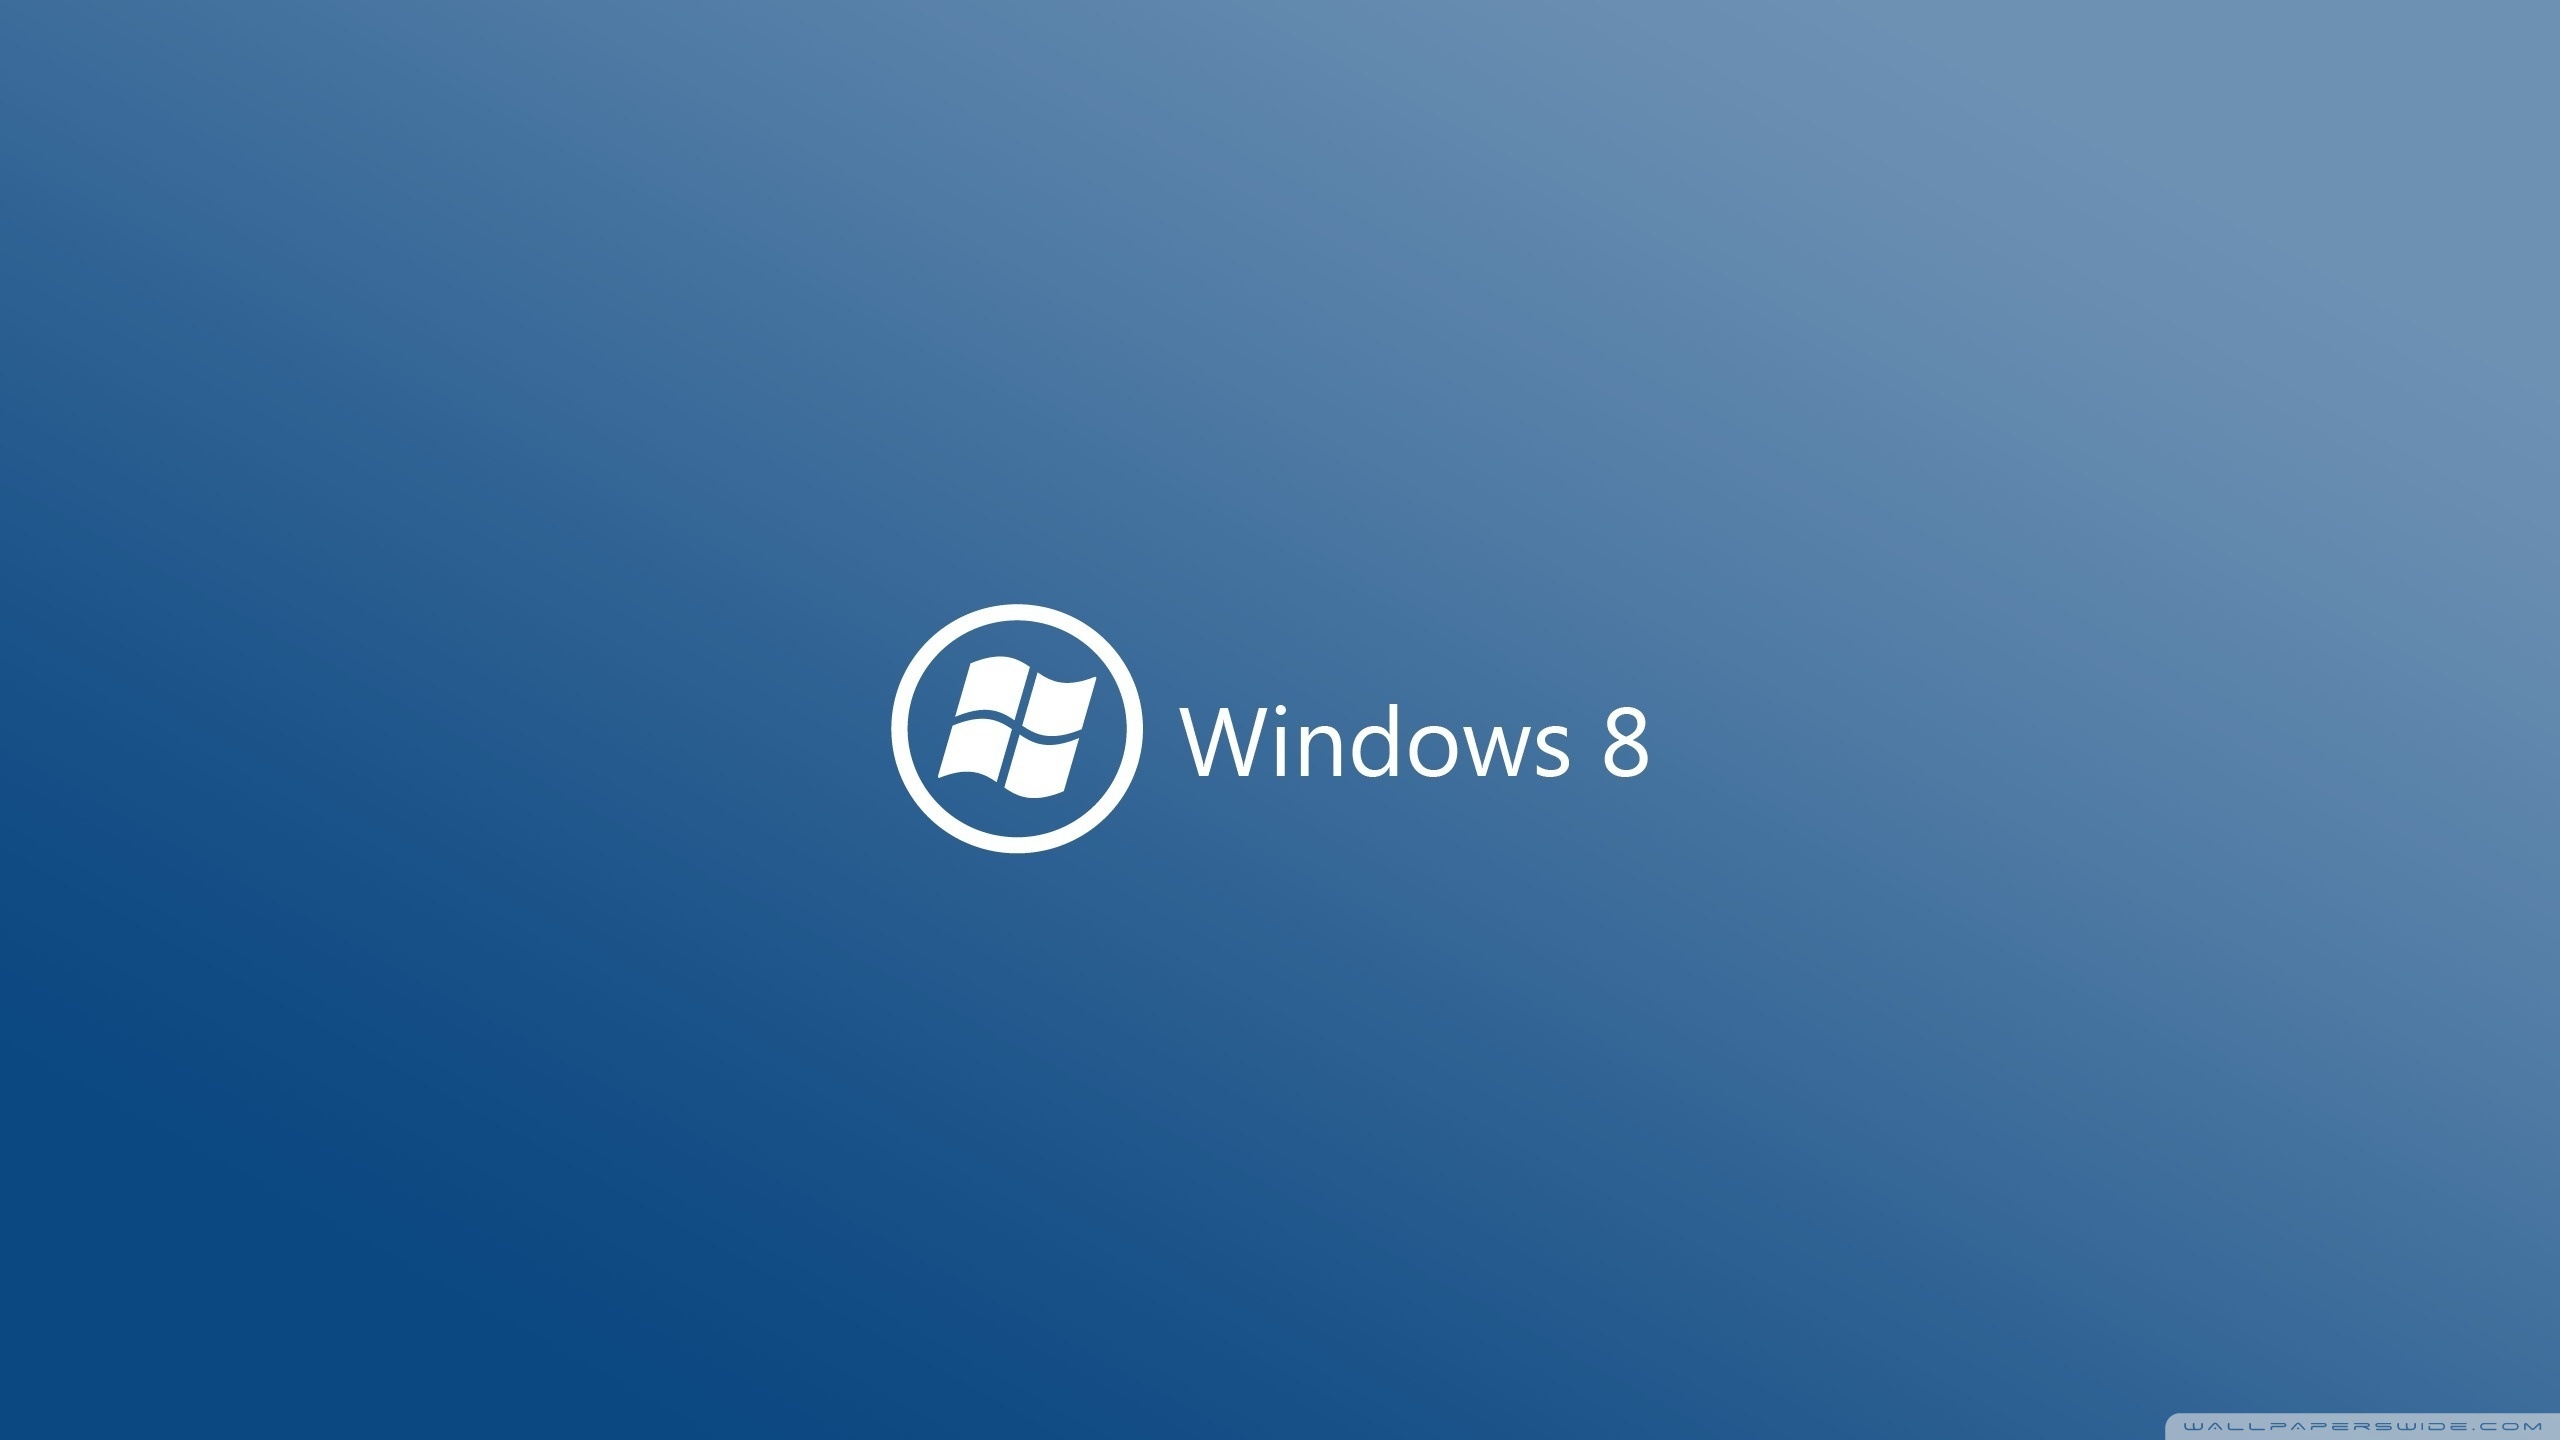 Windows 8 blue minmal theme wallpapers and images ...